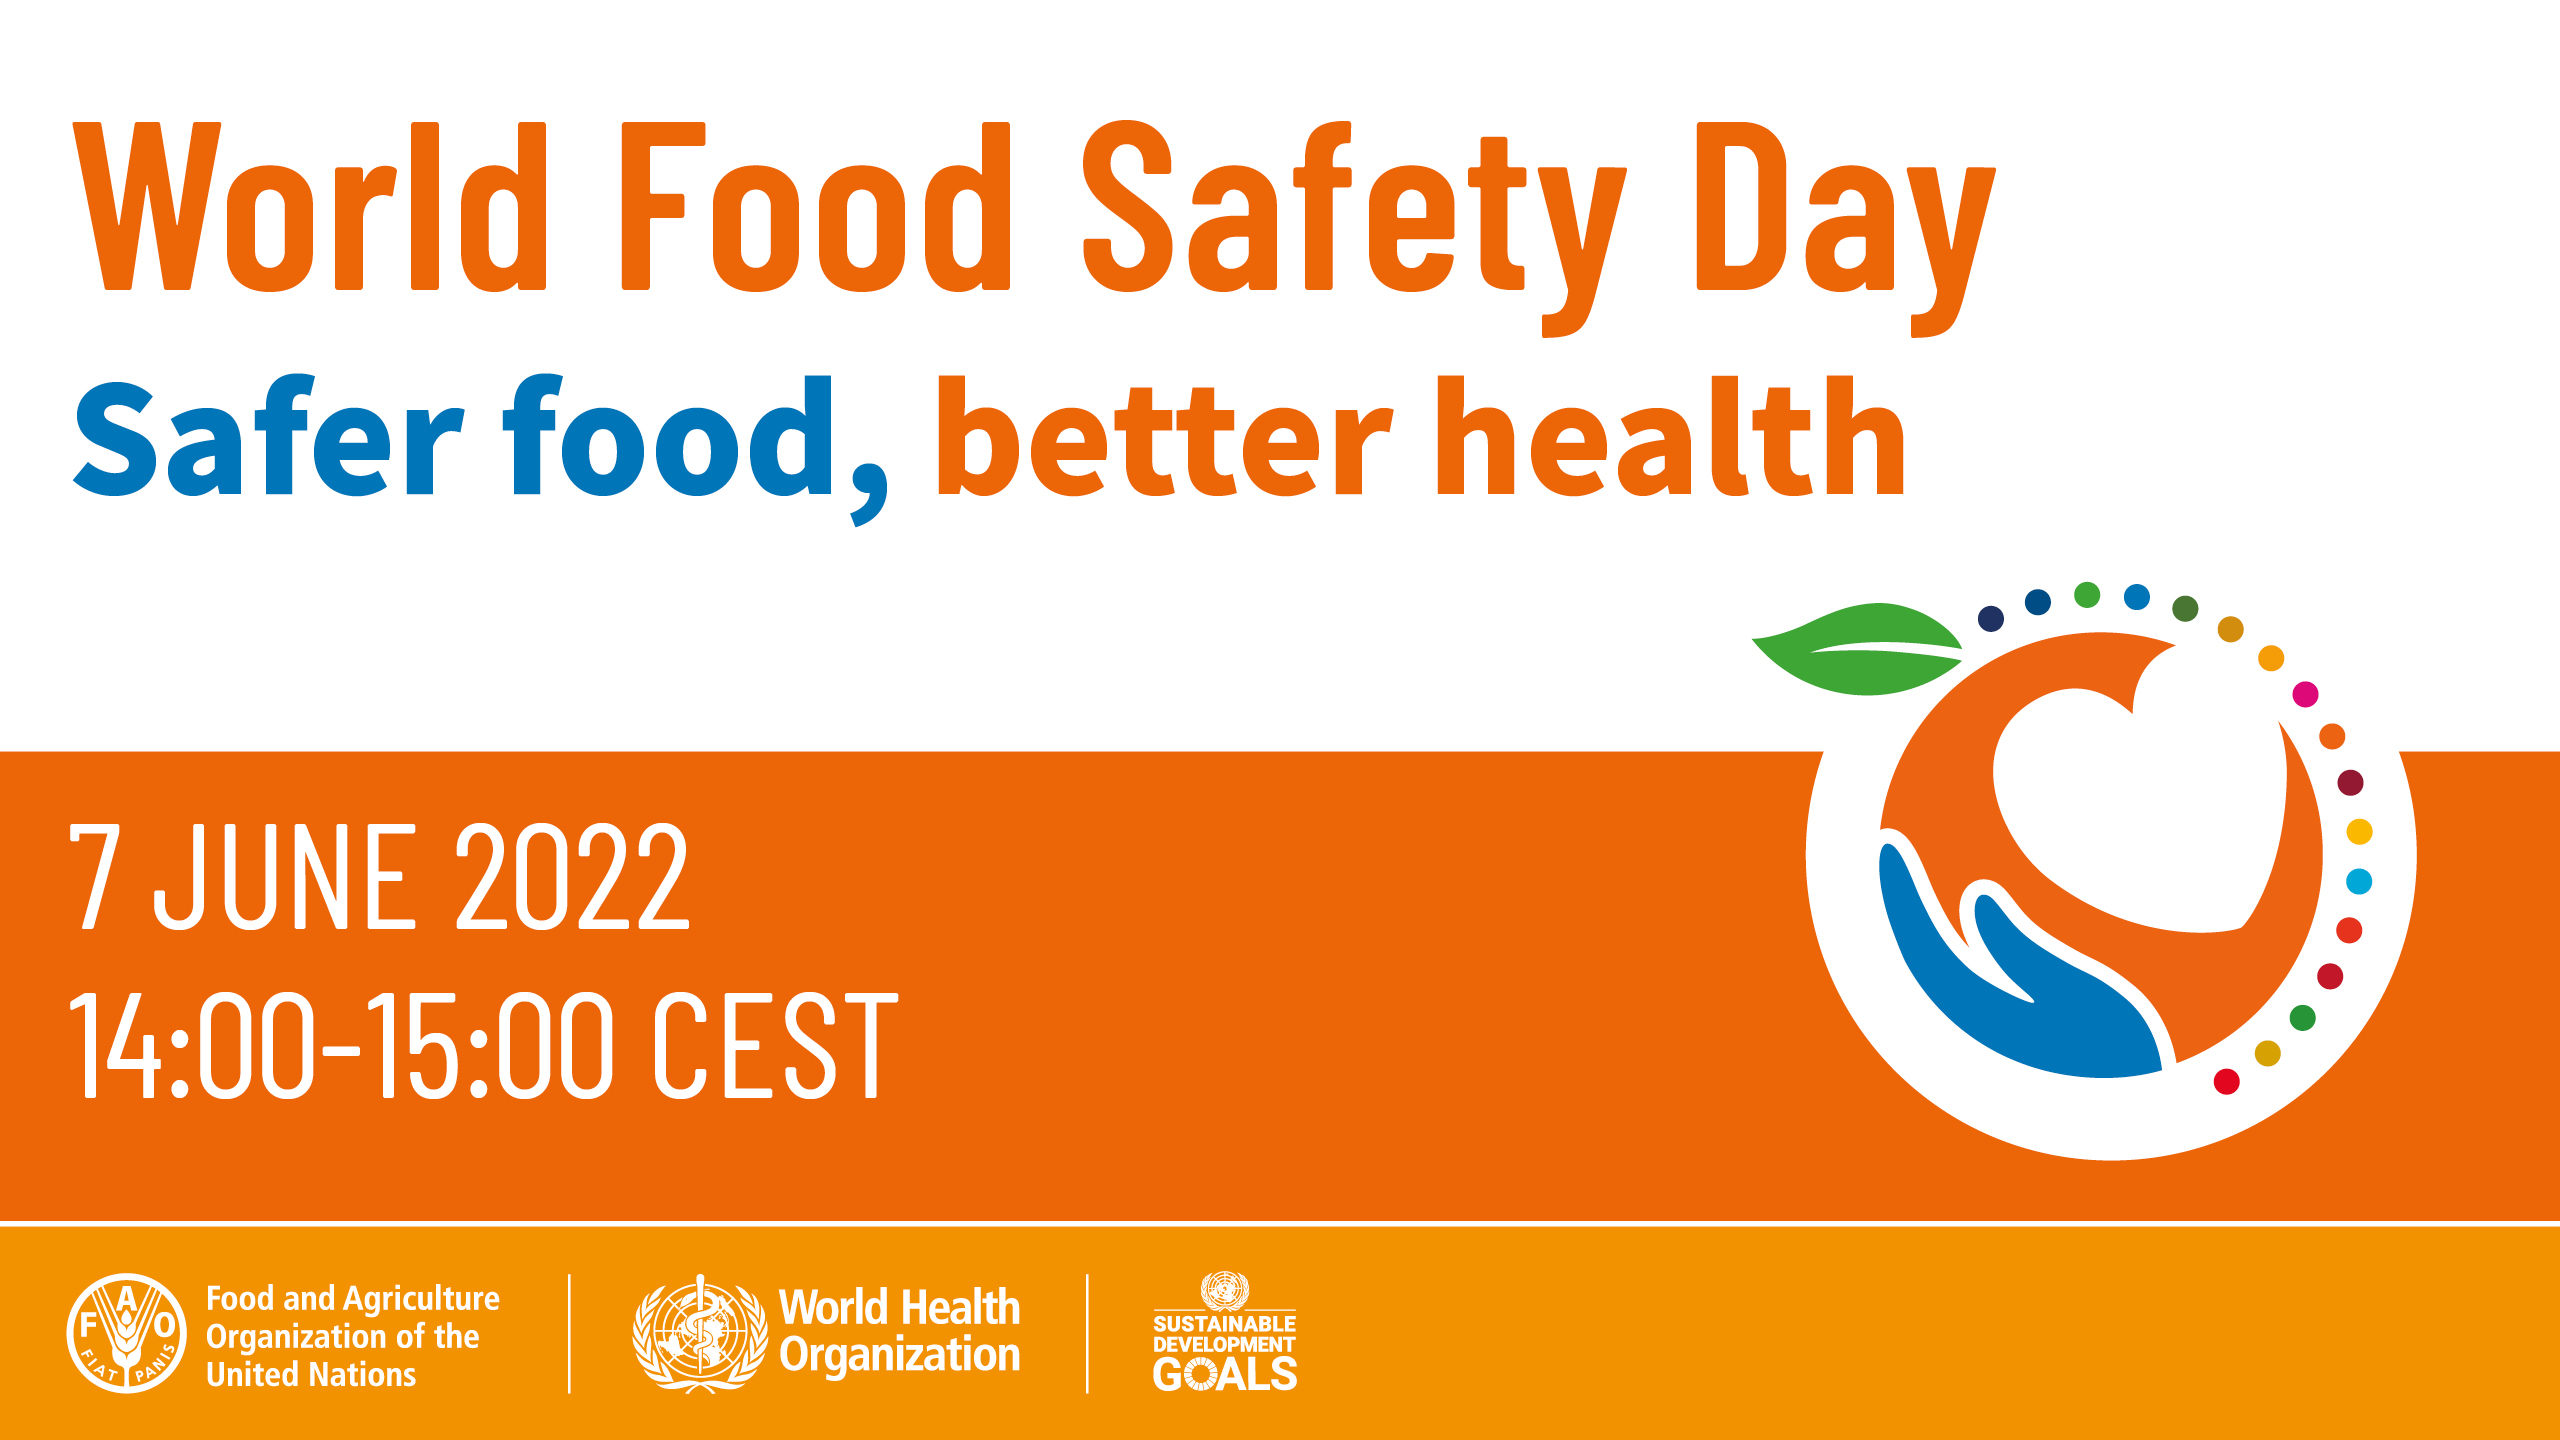 Celebrate World Food Safety Day with us Food safety and quality